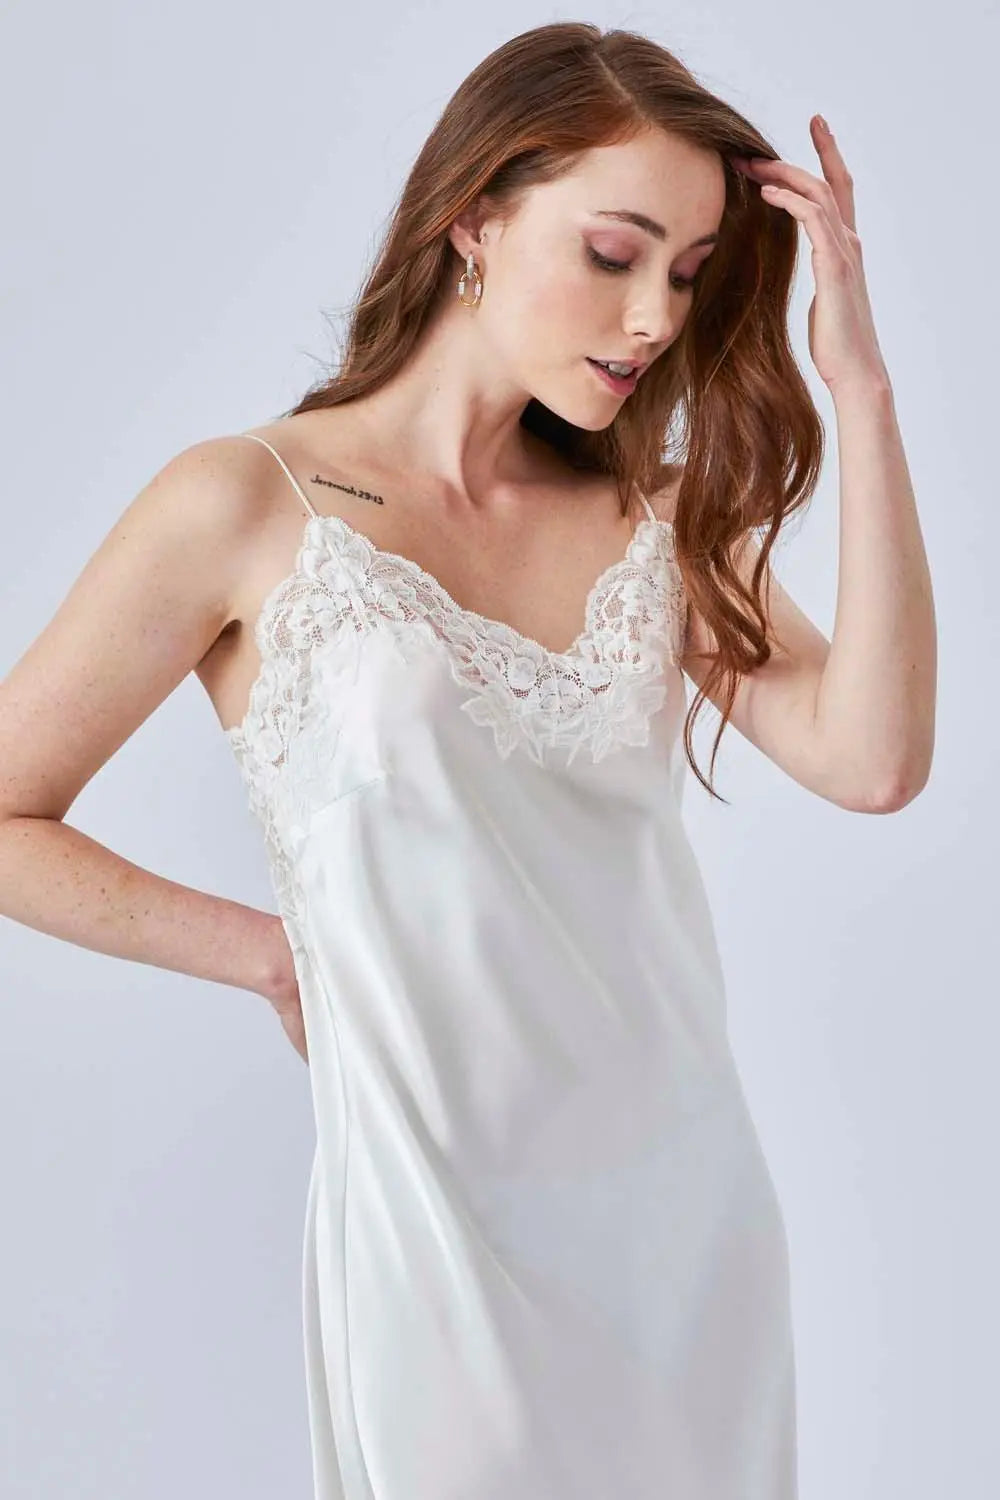 Rena silk nightgown by Bocan